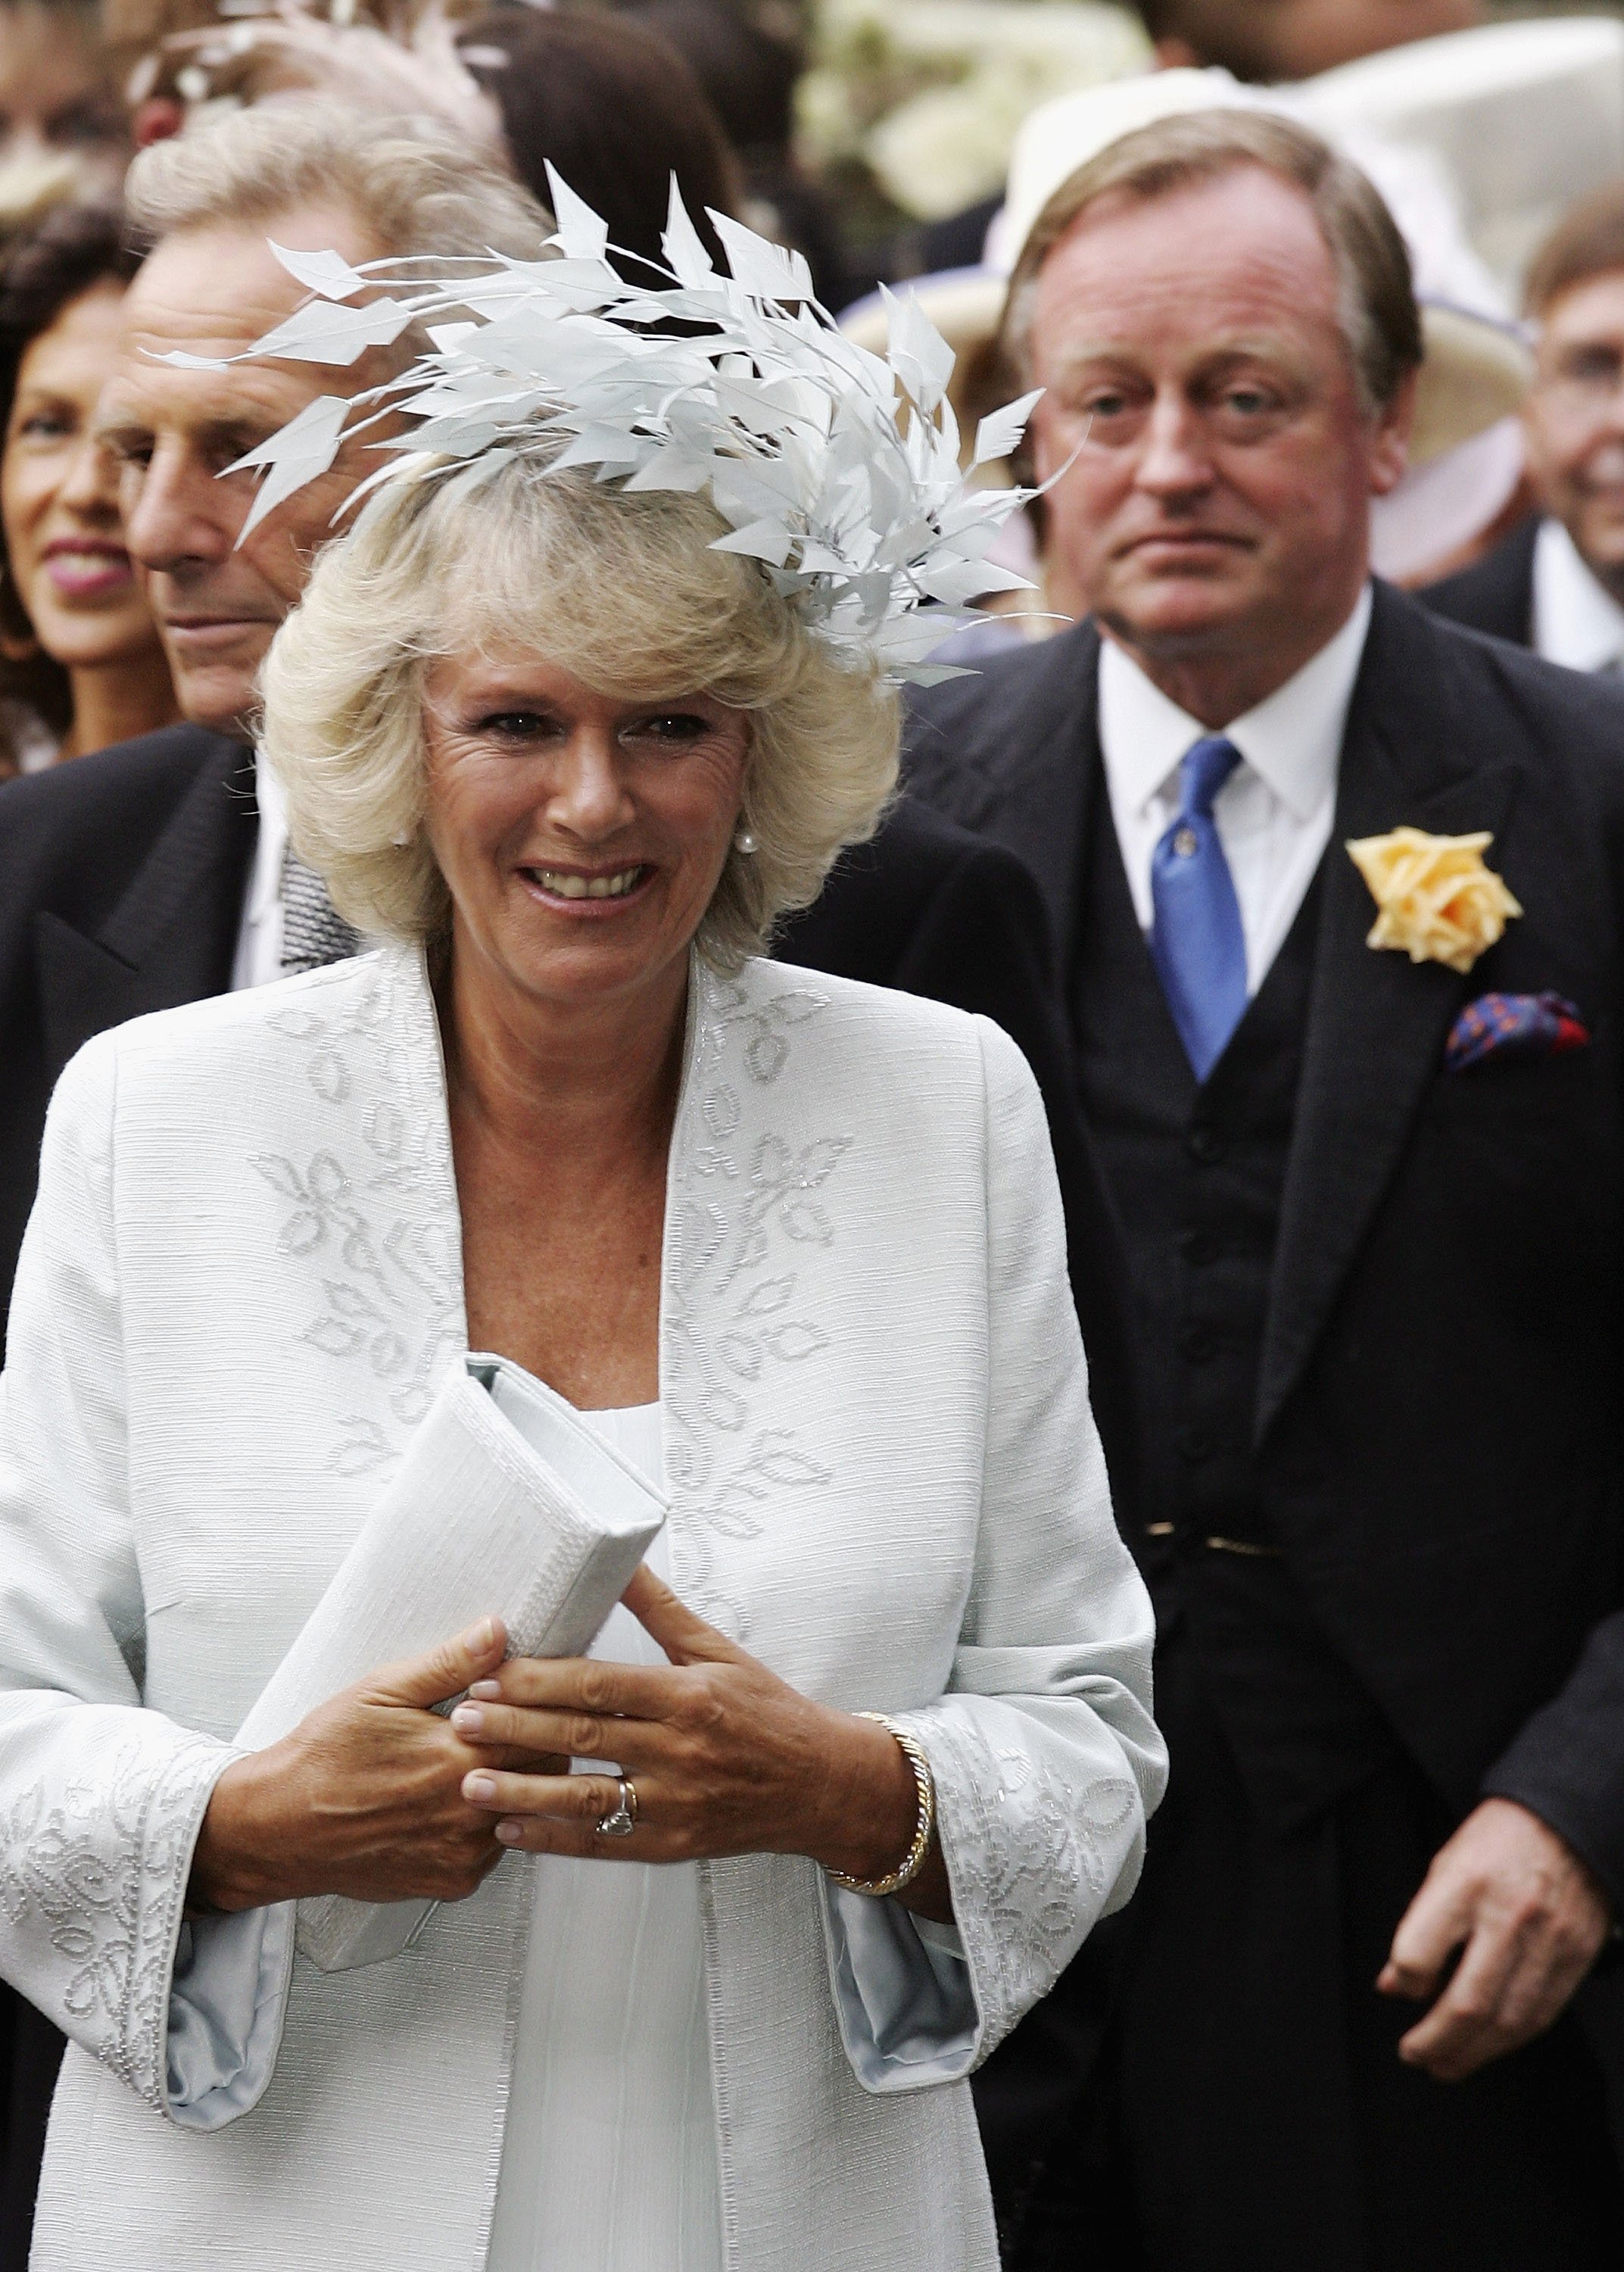 Camilla, Queen Consort and Andrew Parker-Bowles at St. Nicholas Church at Rotherfield Greys in Oxfordshire on September 10, 2005, England. | Source: Getty Images